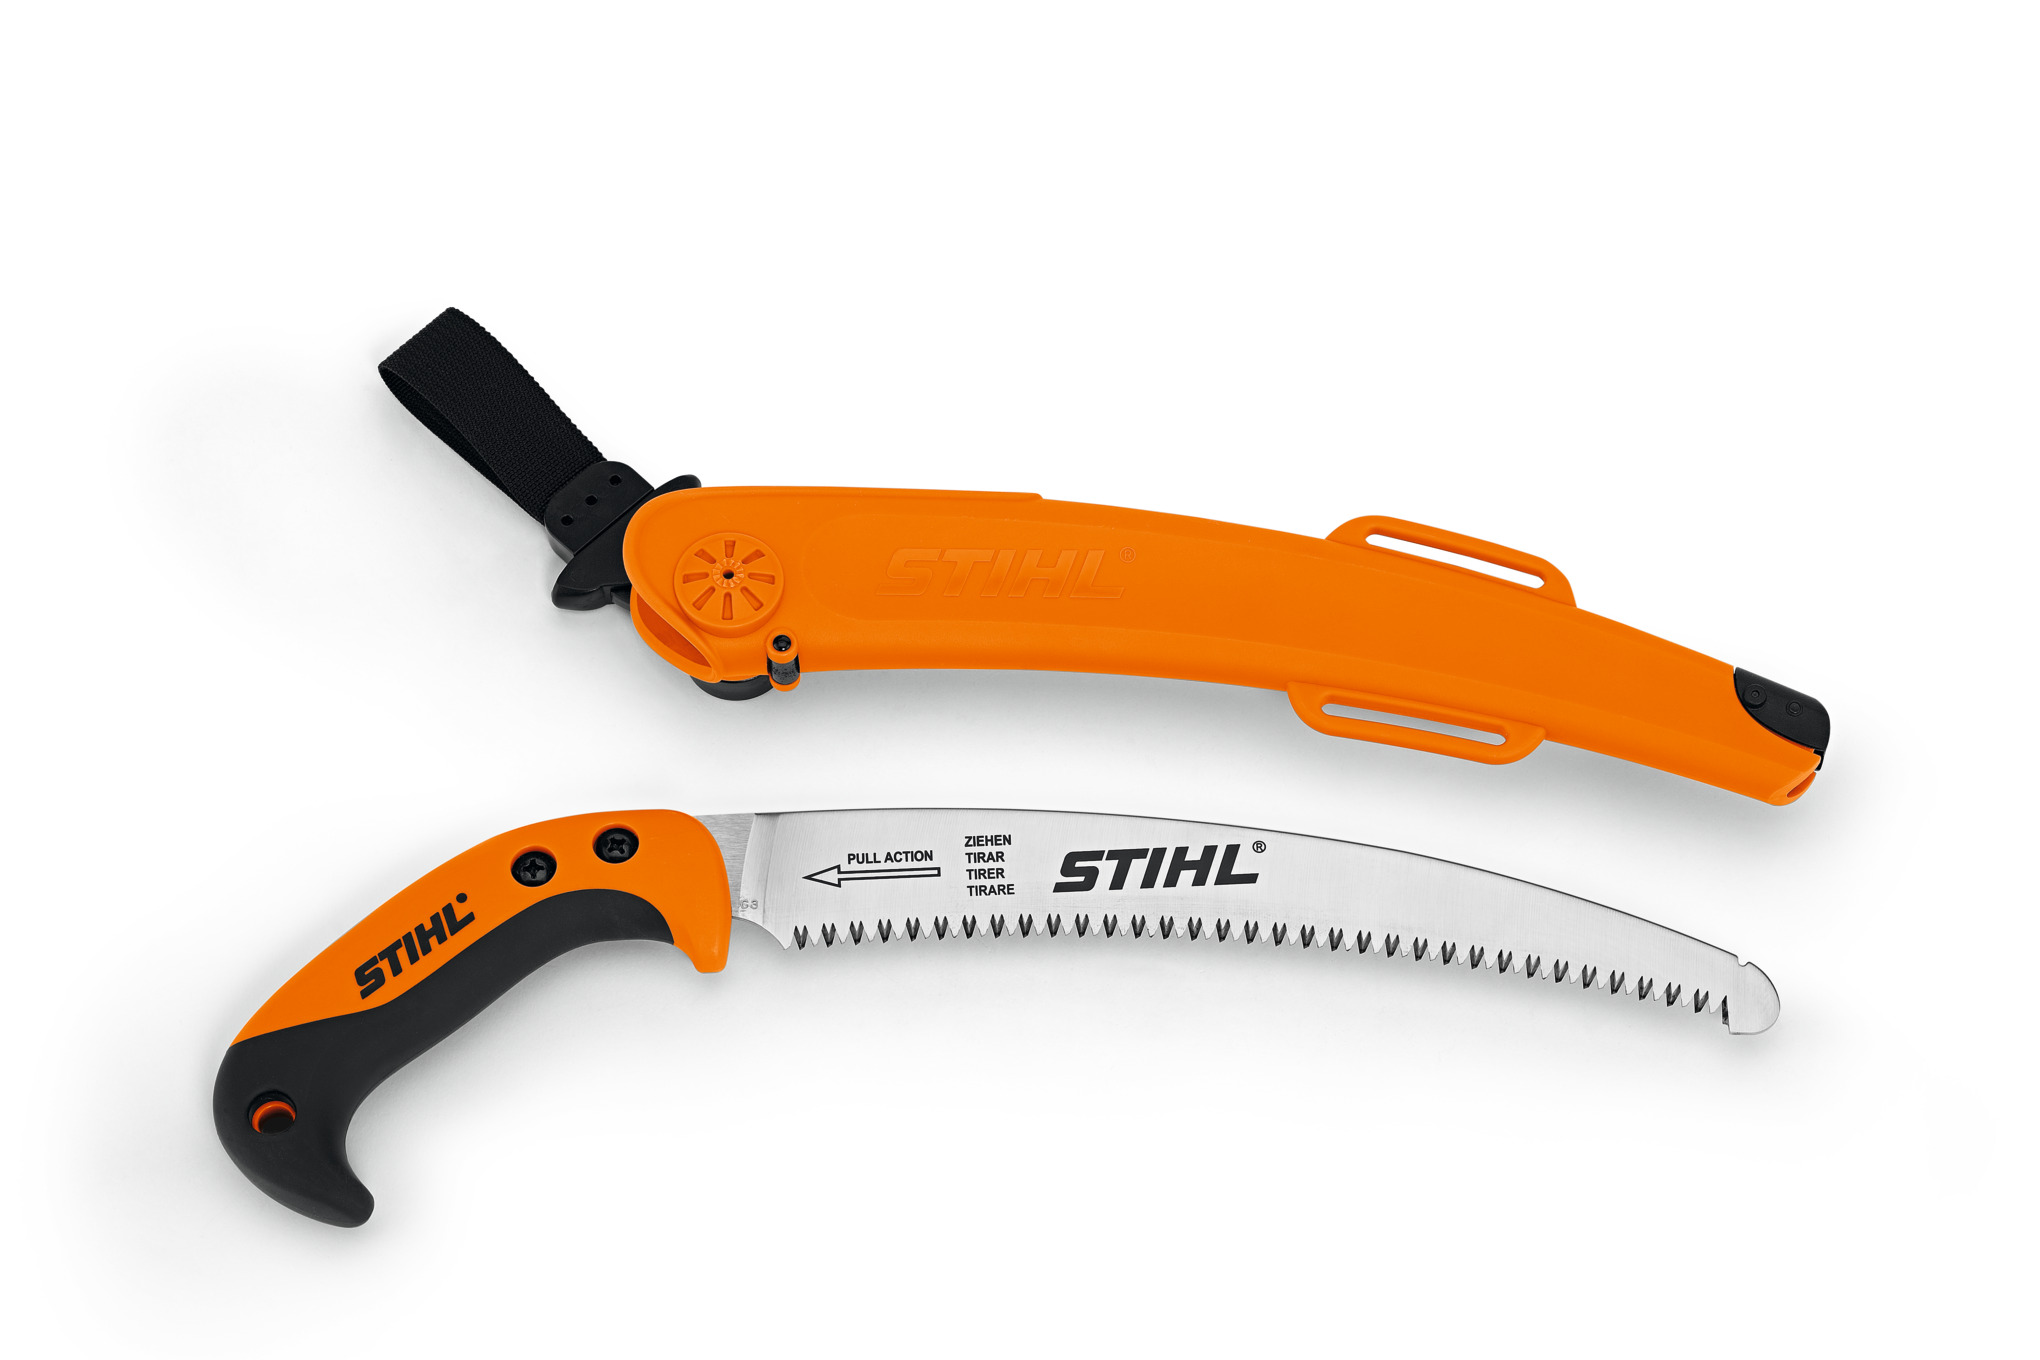 Pruning saws with a curved saw blade